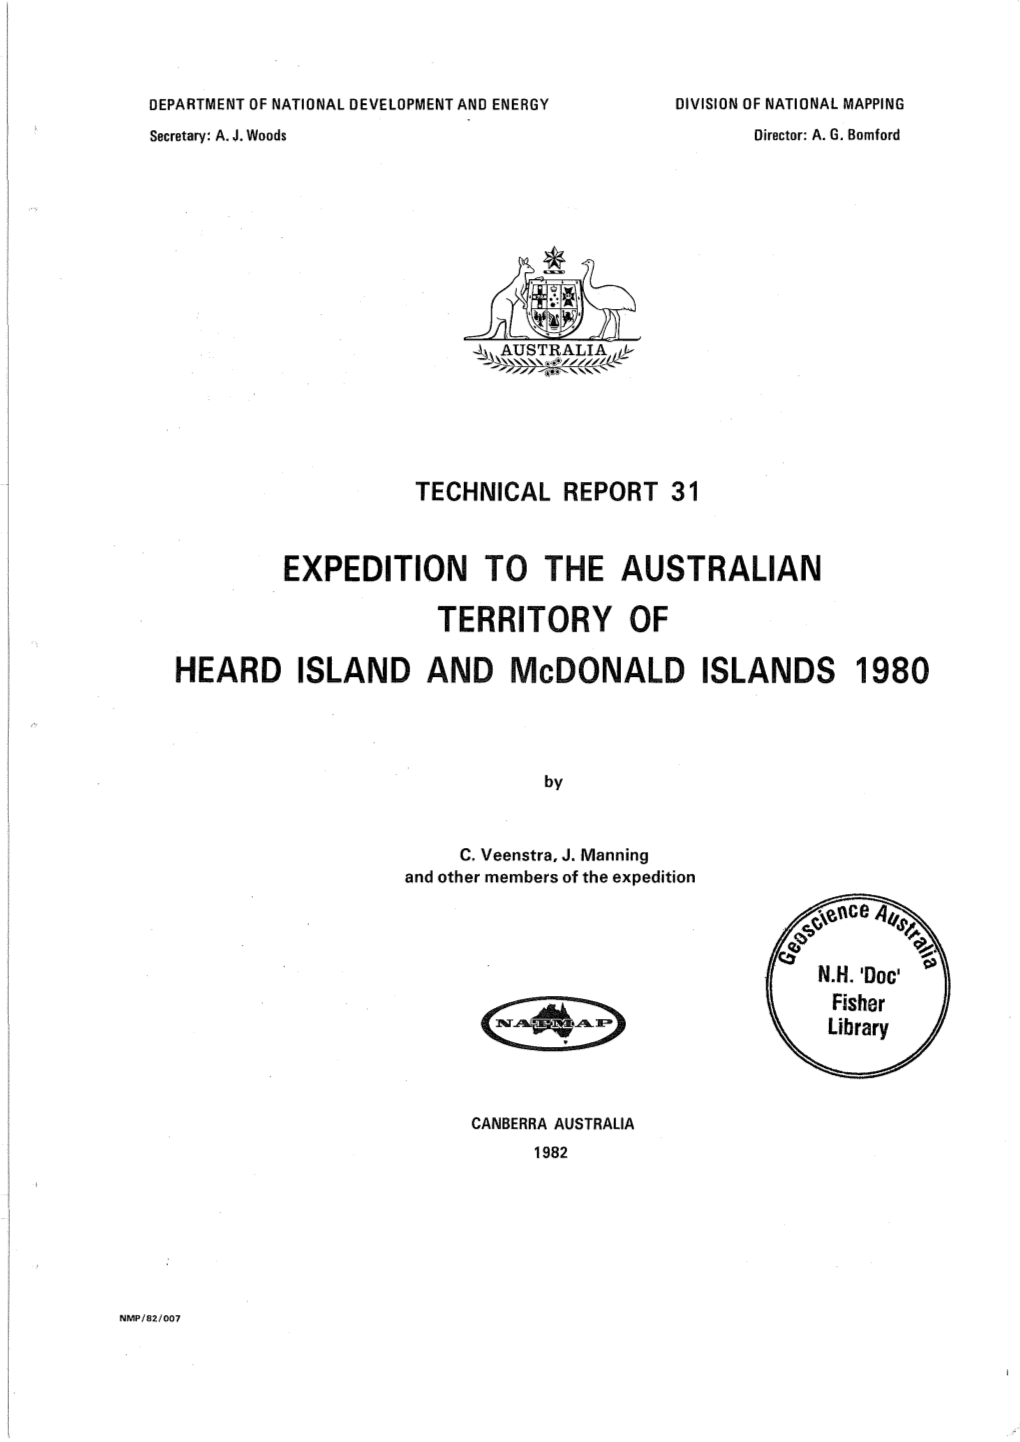 EXPEDITION to the AUSTRALIAN TERRITORY of HEARD ISLAND and Mcdonald ISLANDS 1980